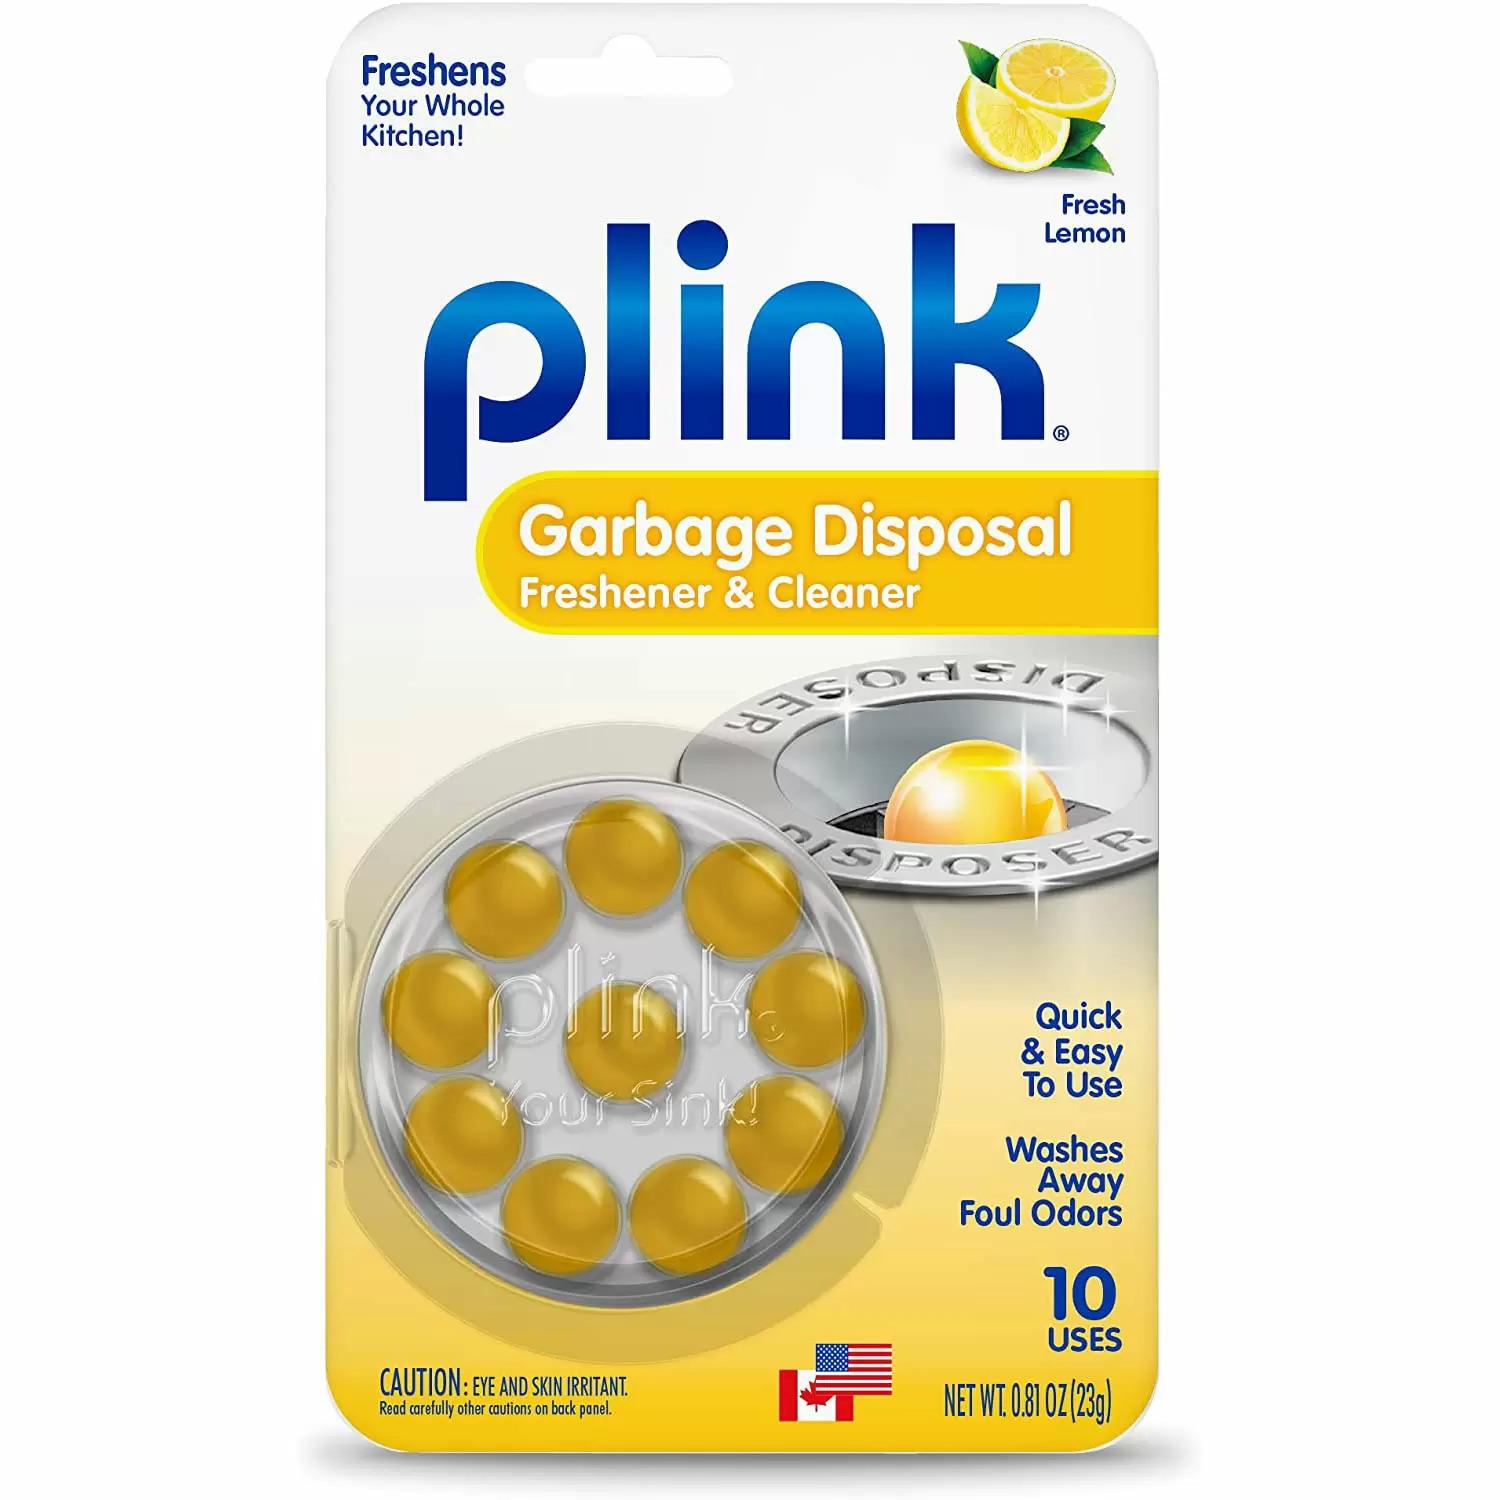 90 Plink Garbage Disposer Cleaner and Deodorizer for $2.59 Shipped